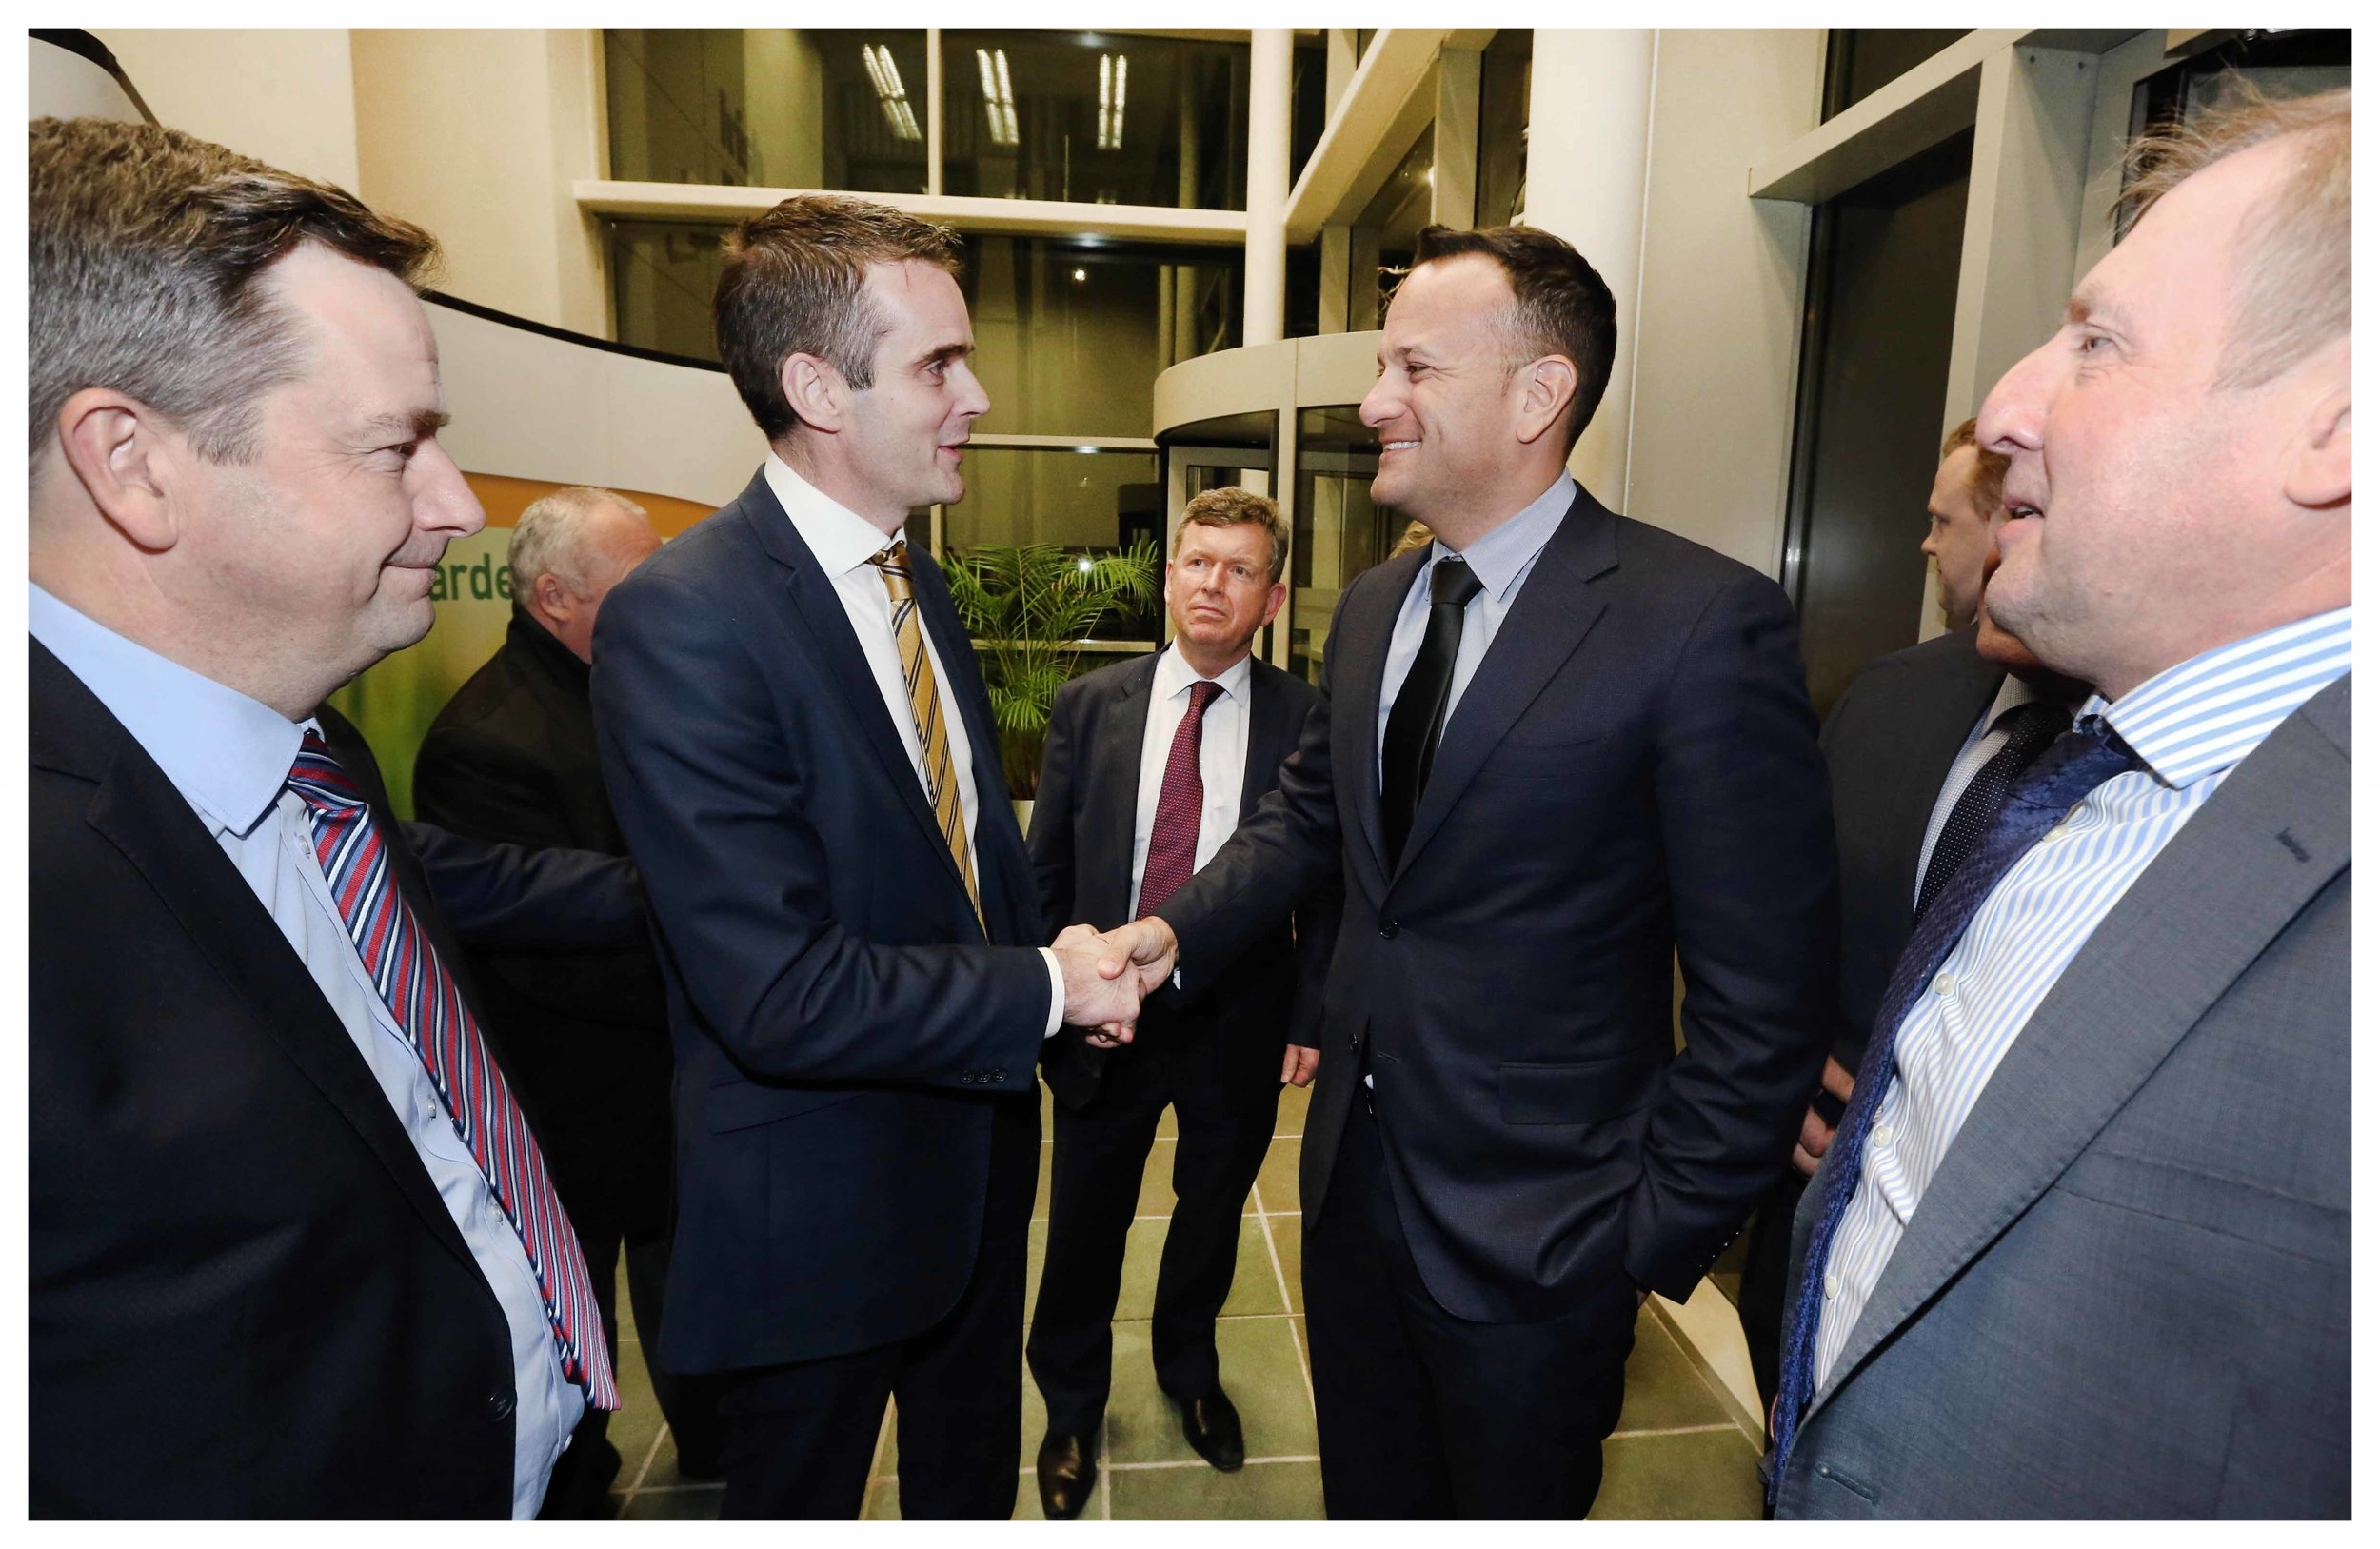  An Taoiseach Leo Varadkar meets IFA President Joe Healy, with IFA General Secretary Damian McDonald and Minister for Agriculture Michael Creed looking on. 